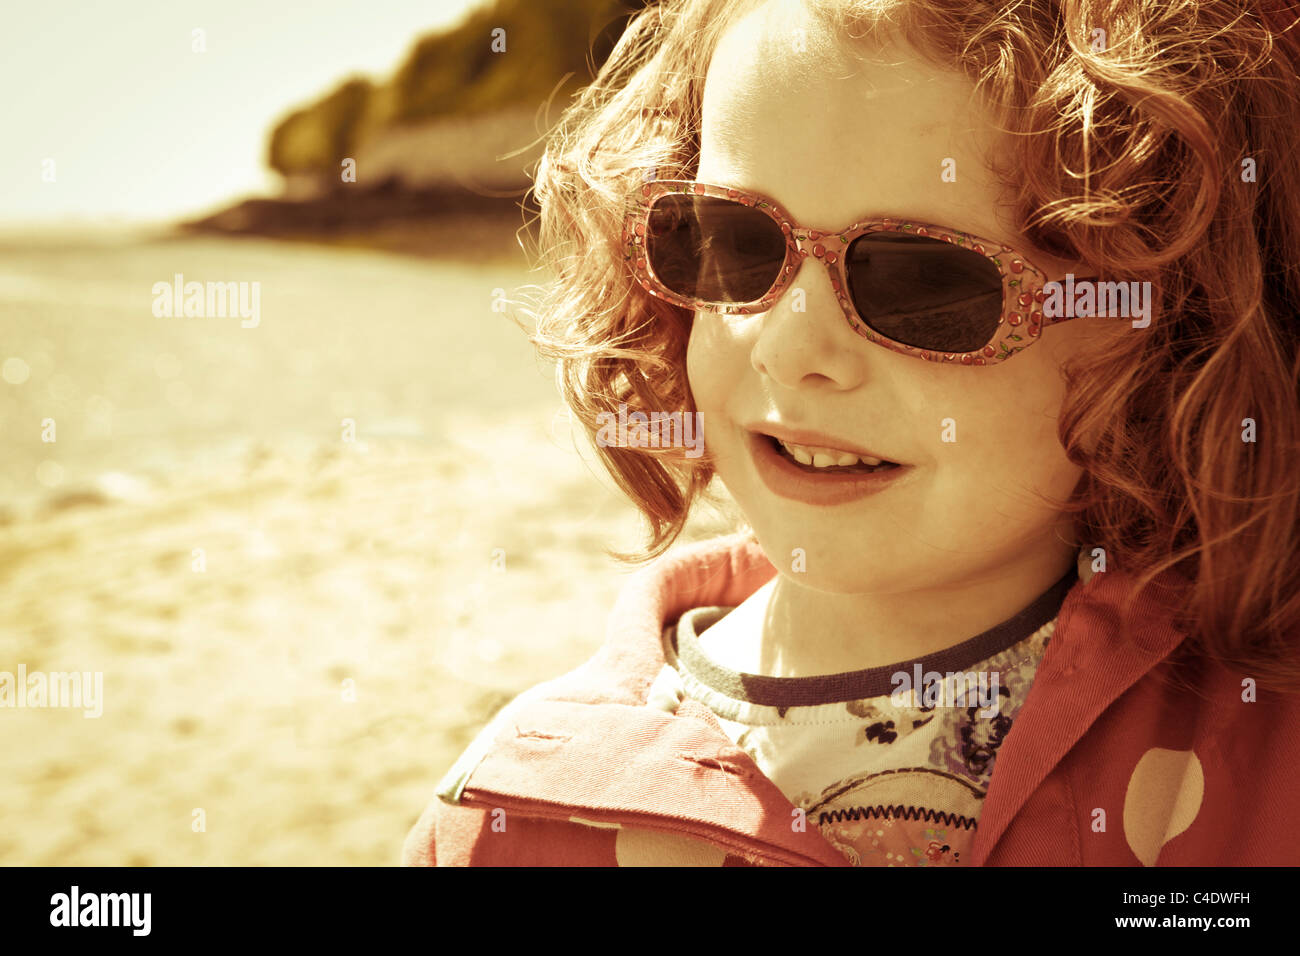 A five year old girl with red hair playing on the beach in Aberdovey, Wales. Stock Photo